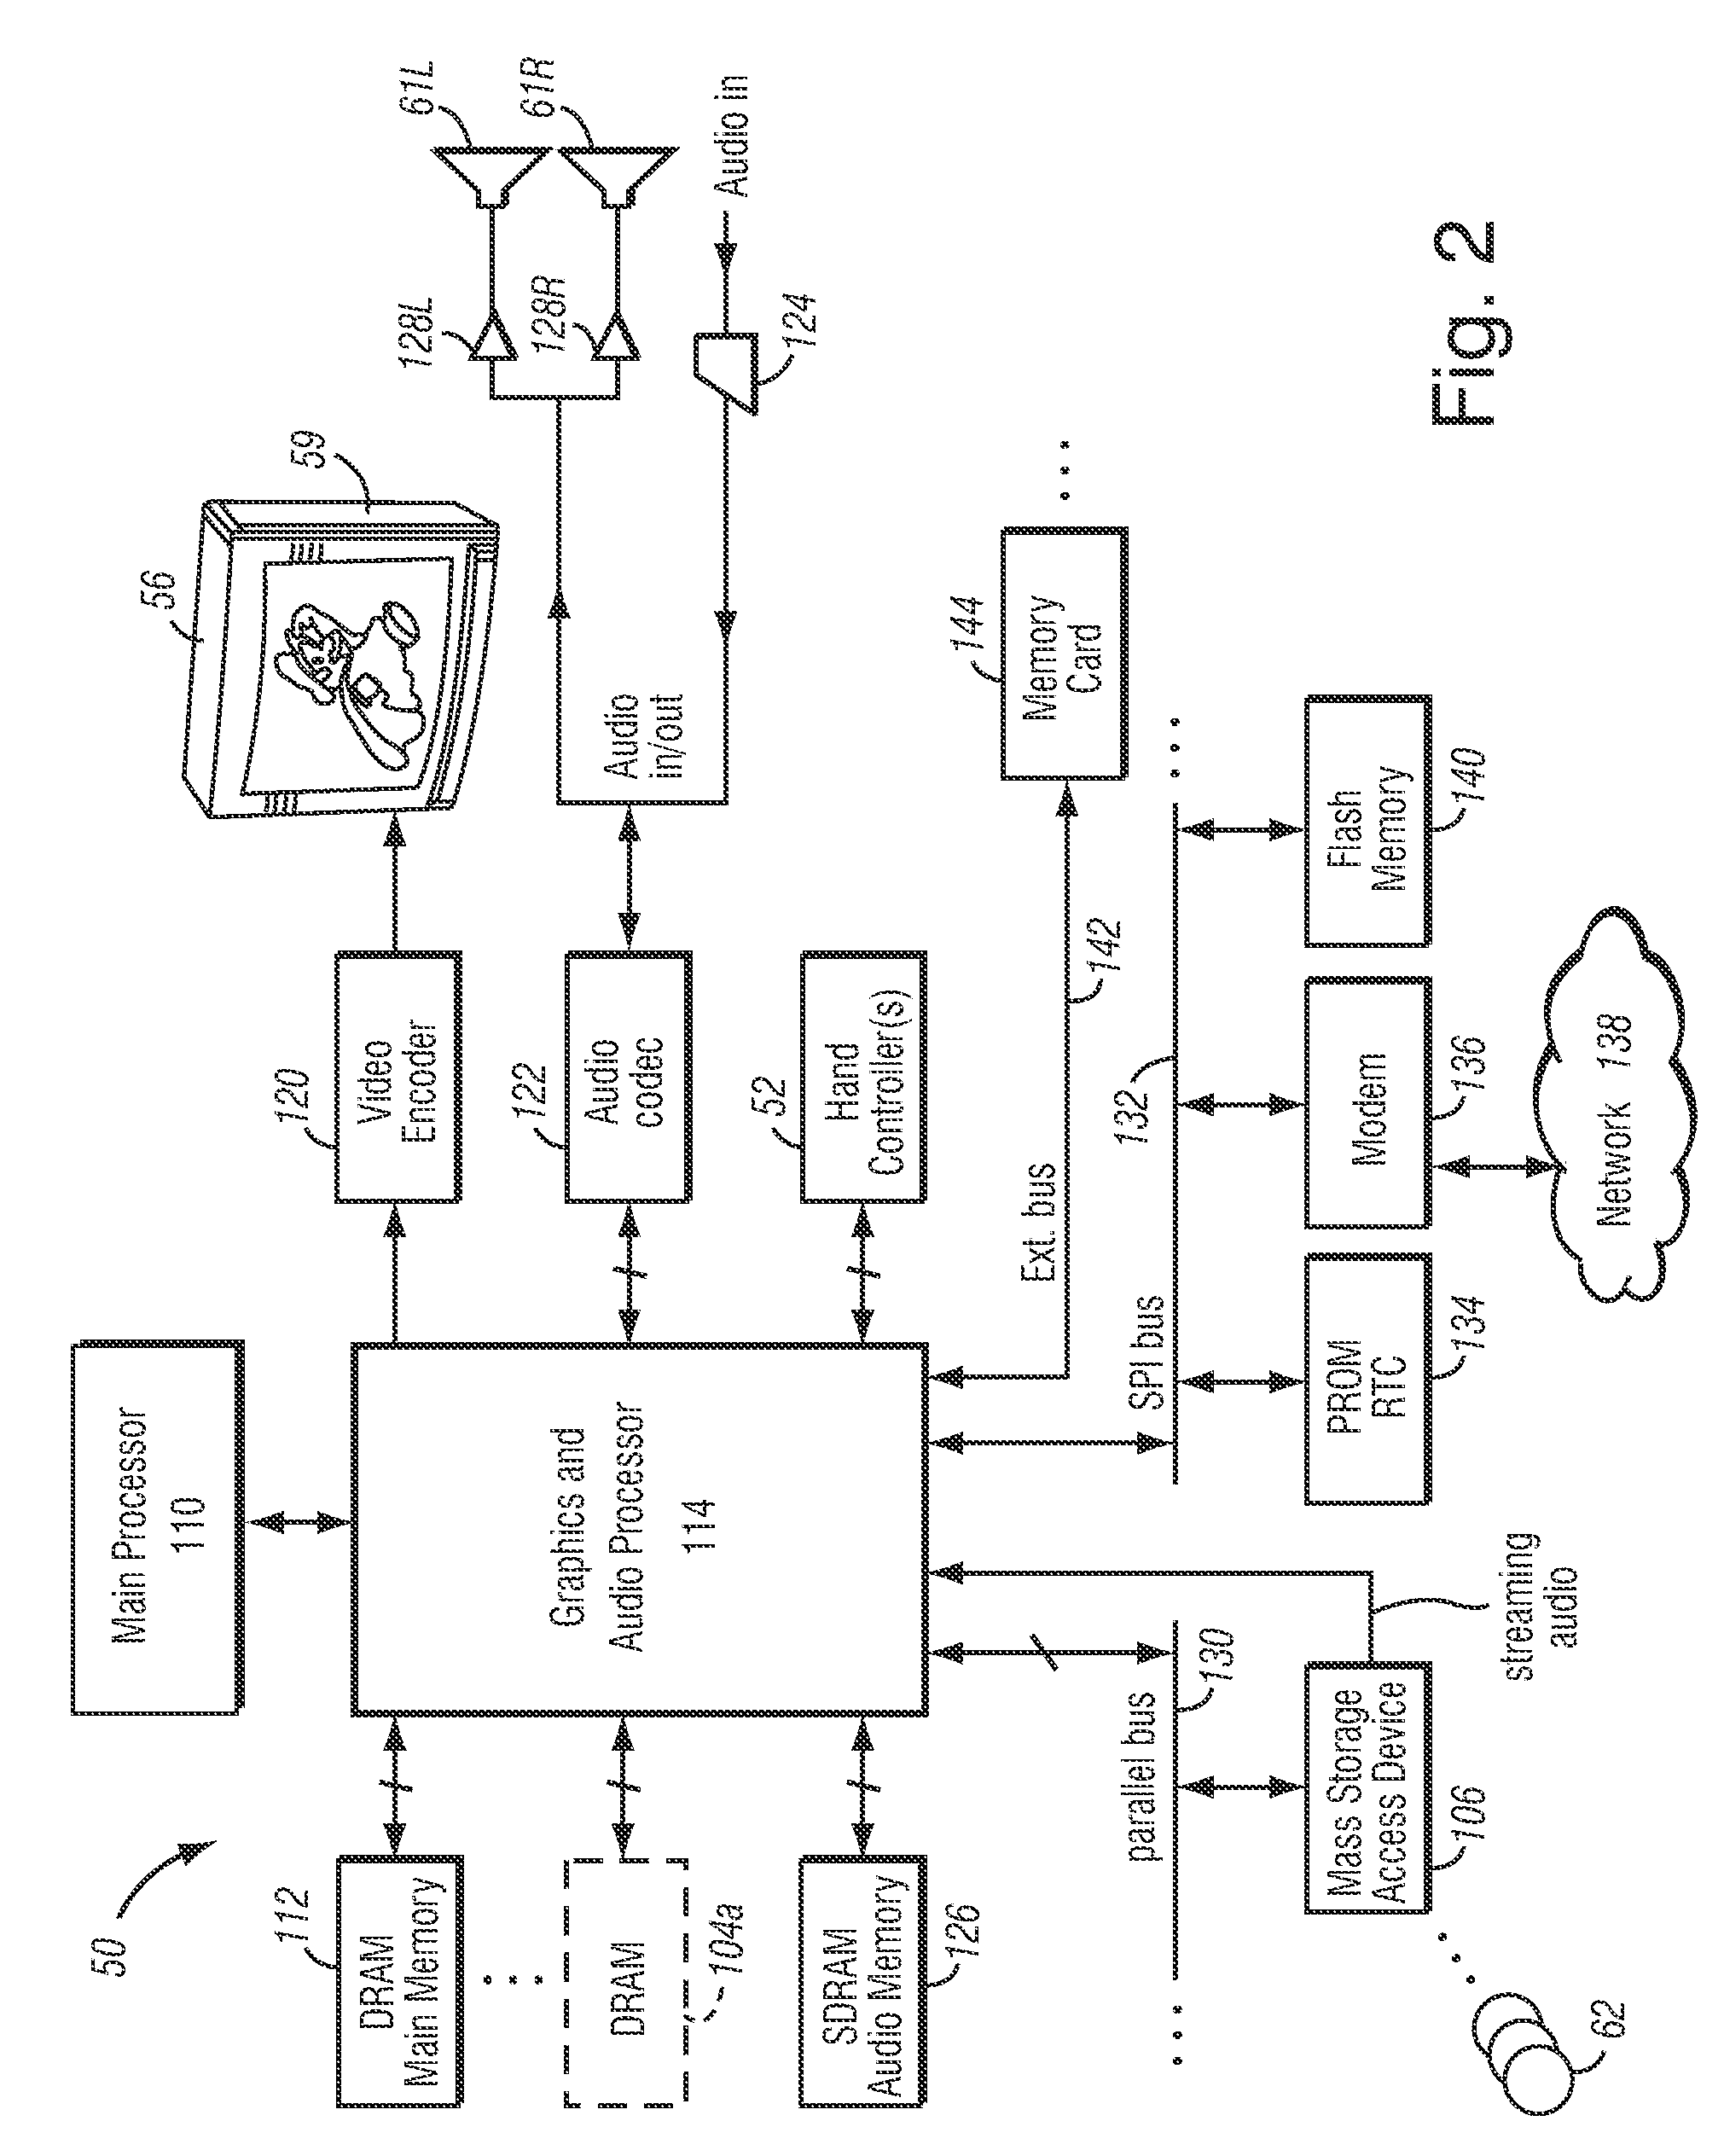 Graphics Processing System with Enhanced Memory Controller